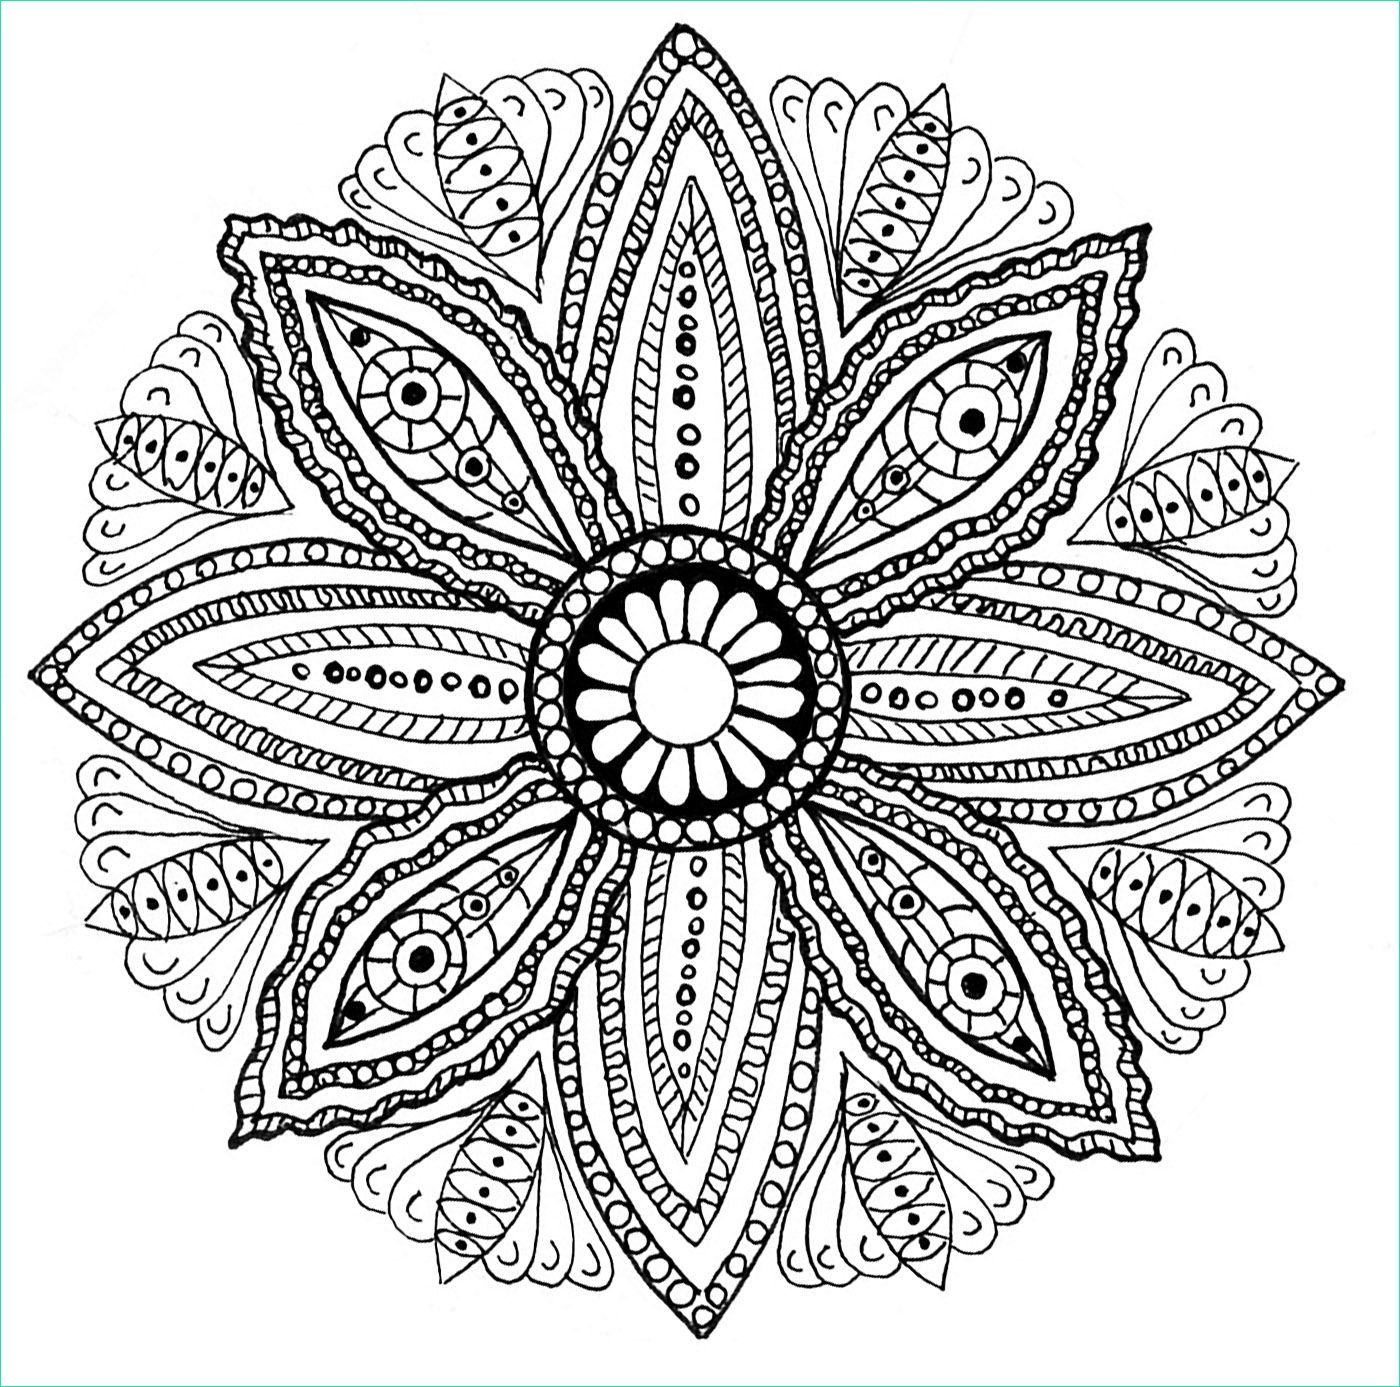 image=flowers ve ation mandala with flowers and leaves by Olivier 1